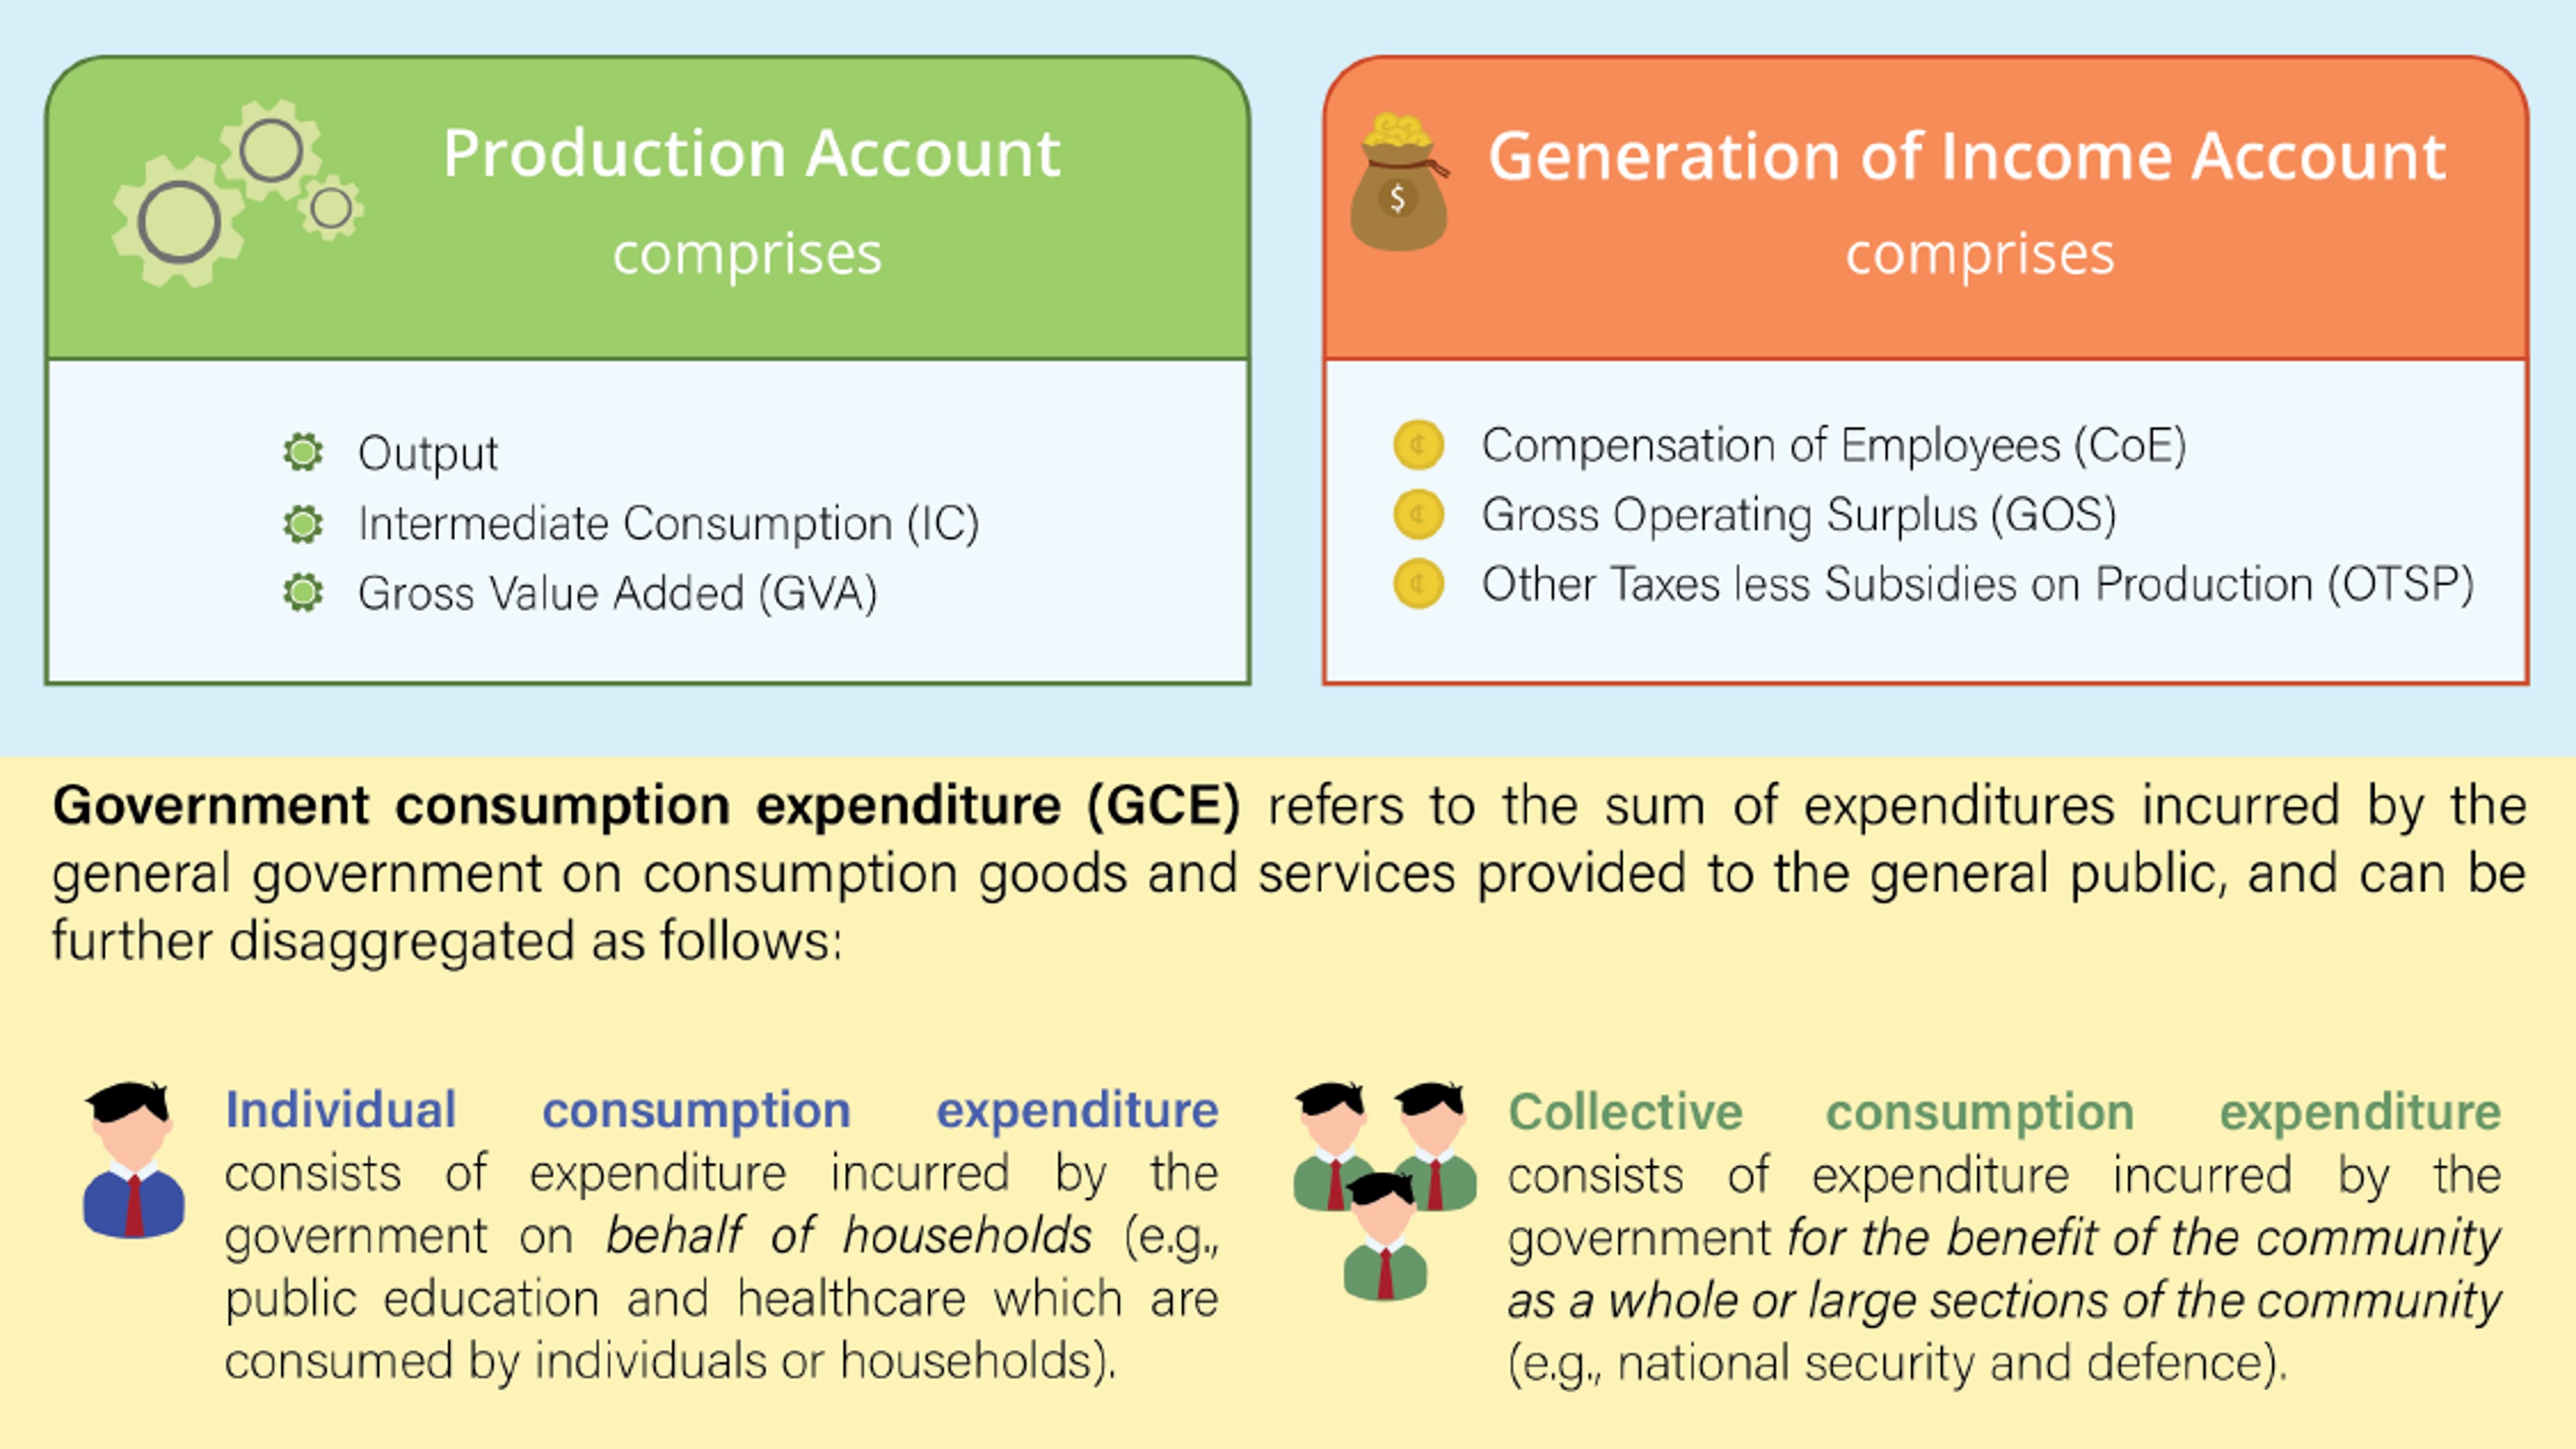 Production and Generation of Income Accounts & Government Consumption Expenditure by Individual and Collective Consumption